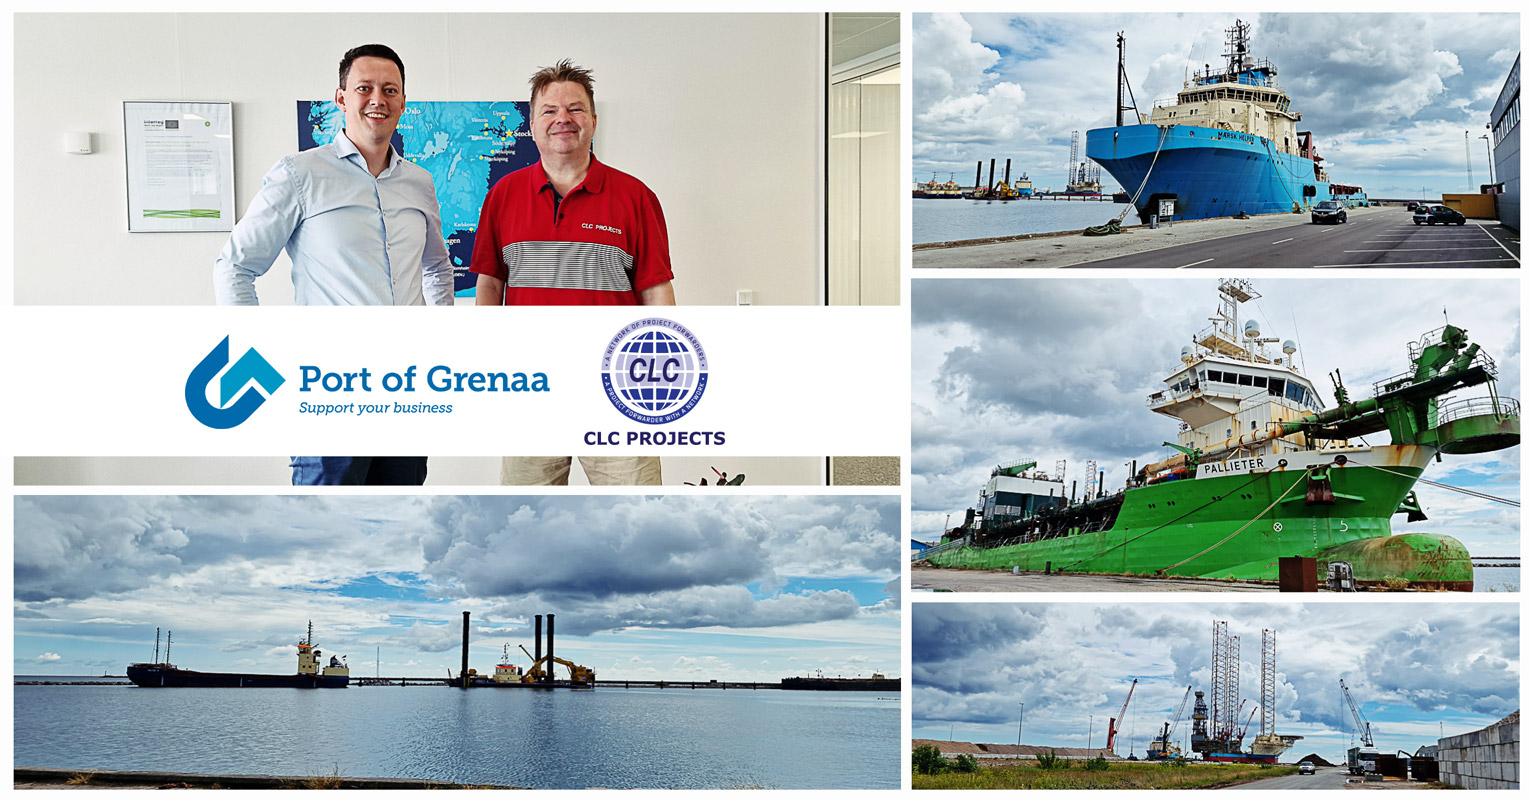 Cross Ocean’s Chairman met with one of our Preferred Service Providers Mr. Theis Gisselbæk of Port of Grenaa where the worlds largest jack up drilling rig was alongside